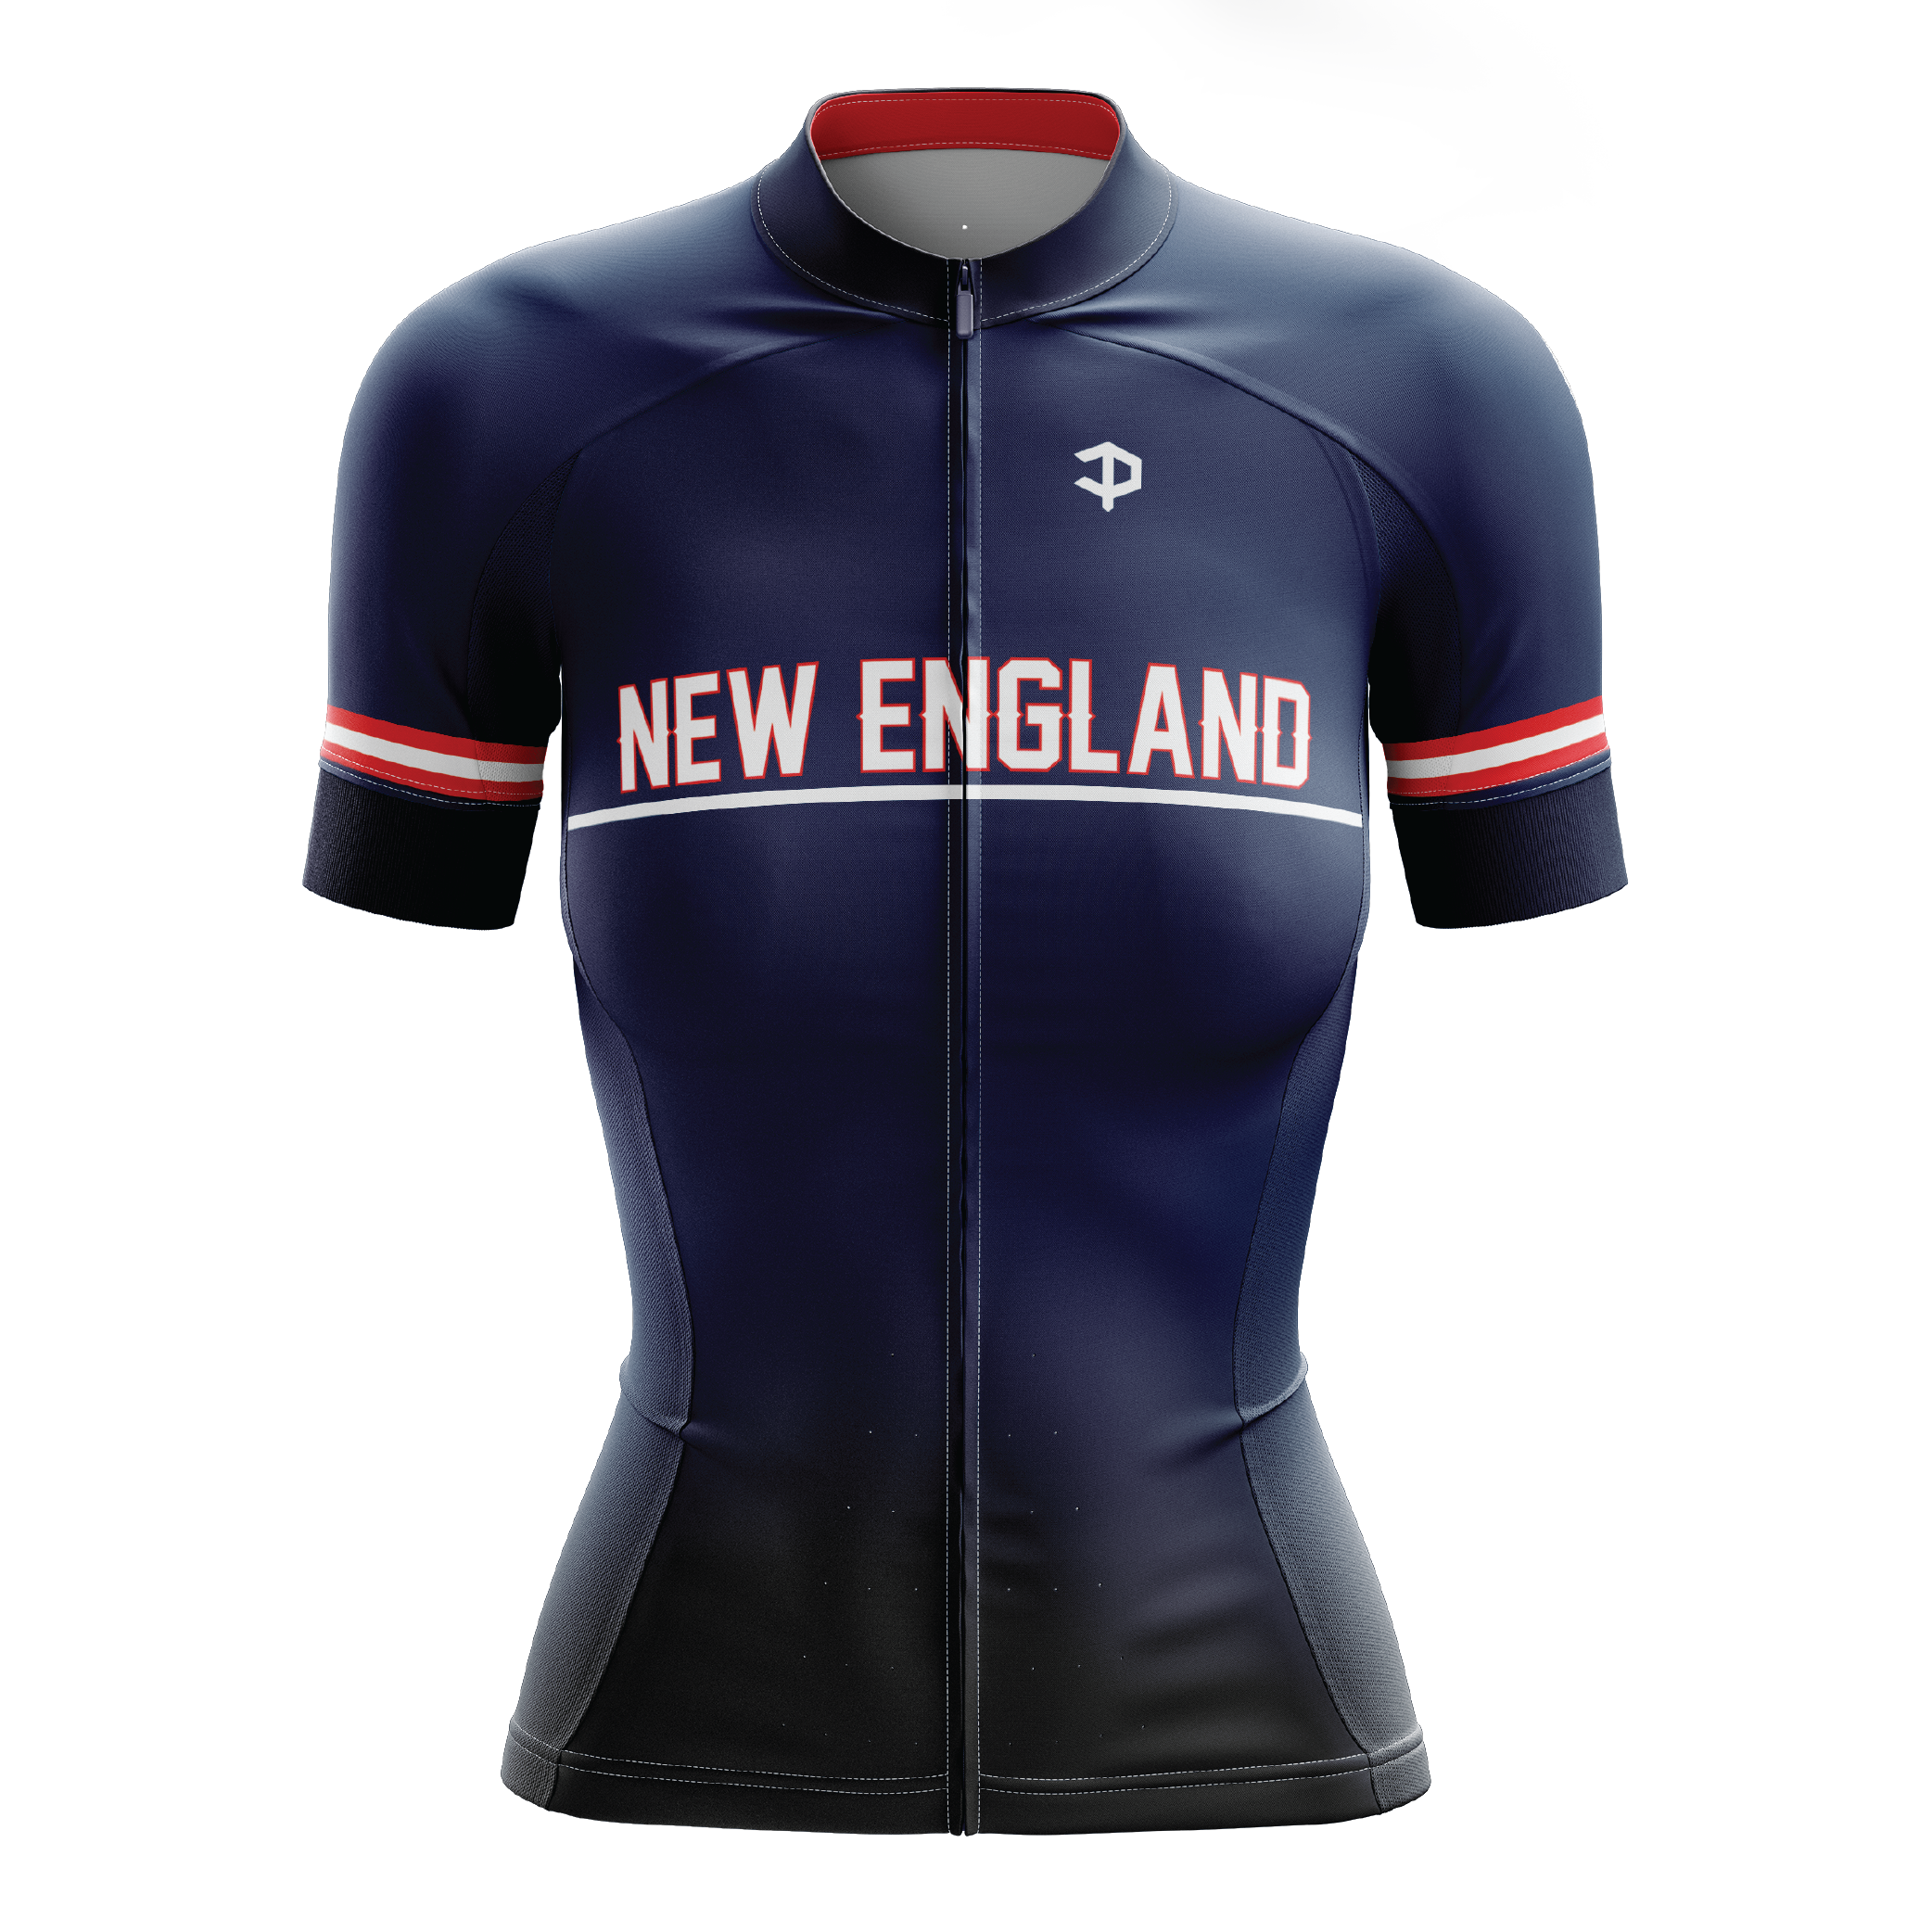 New England Short Sleeve Cycling Jersey